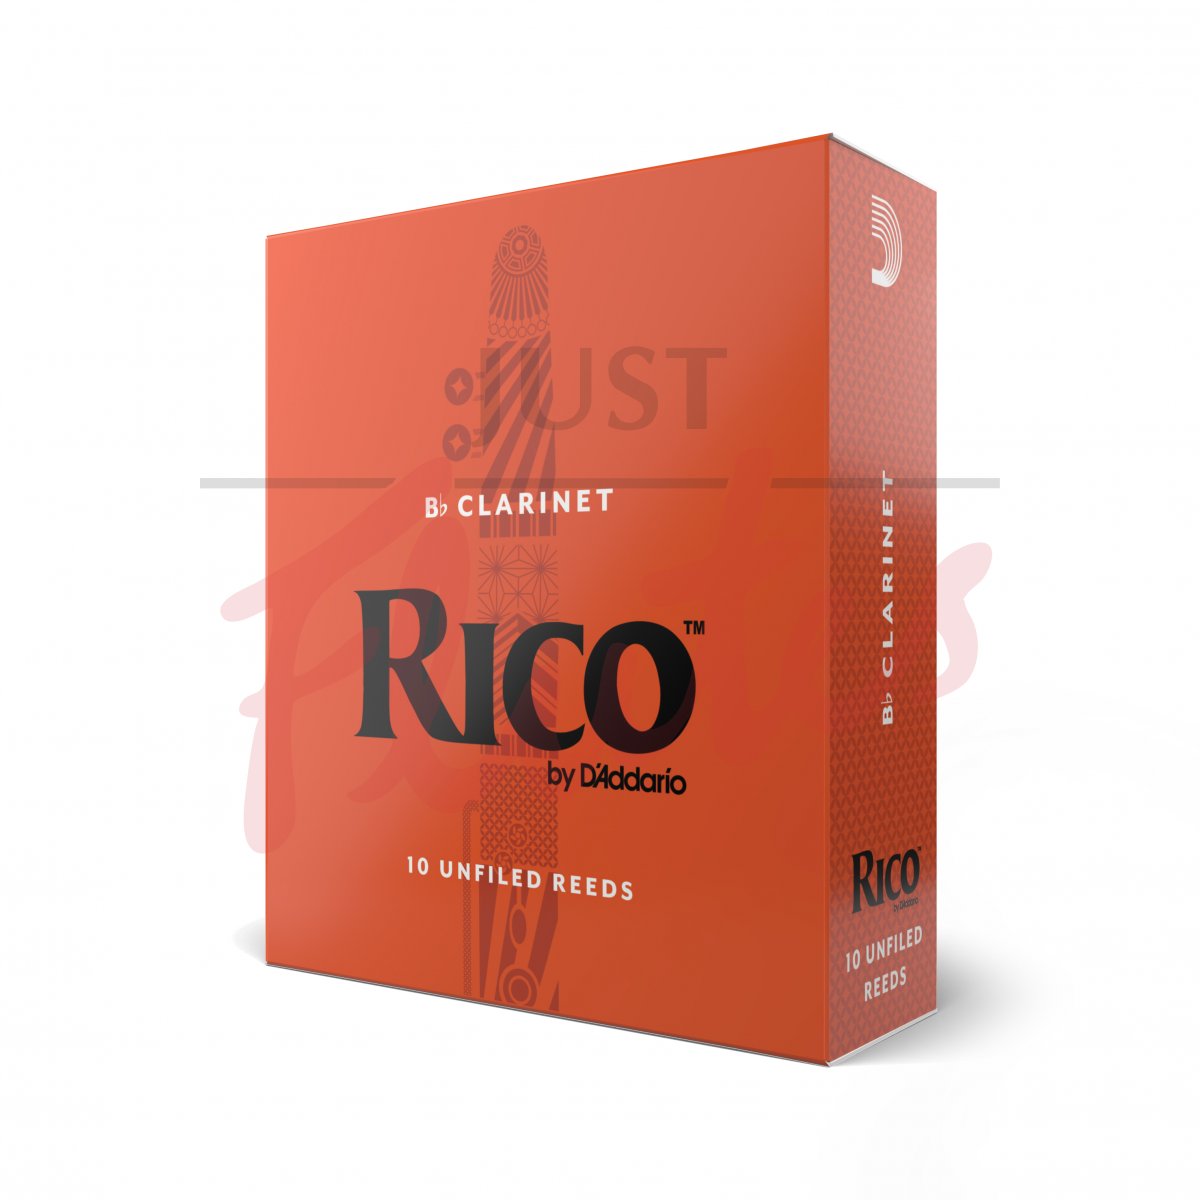 Rico by D'Addario RCA1030 Clarinet Reeds, 10-pack - Strength 3